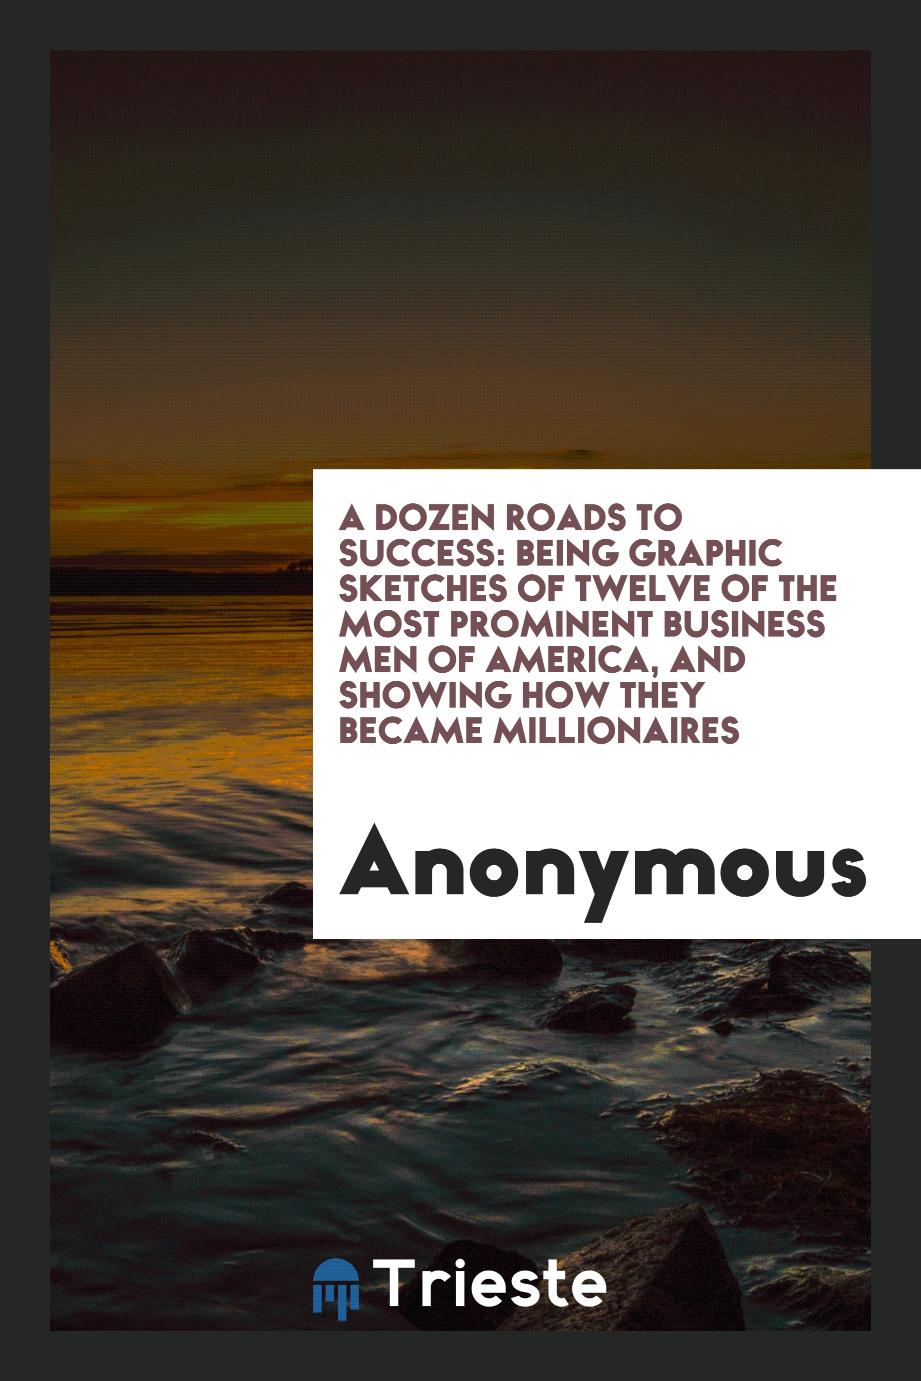 A Dozen roads to success: being graphic sketches of twelve of the most prominent business men of America, and showing how they became millionaires